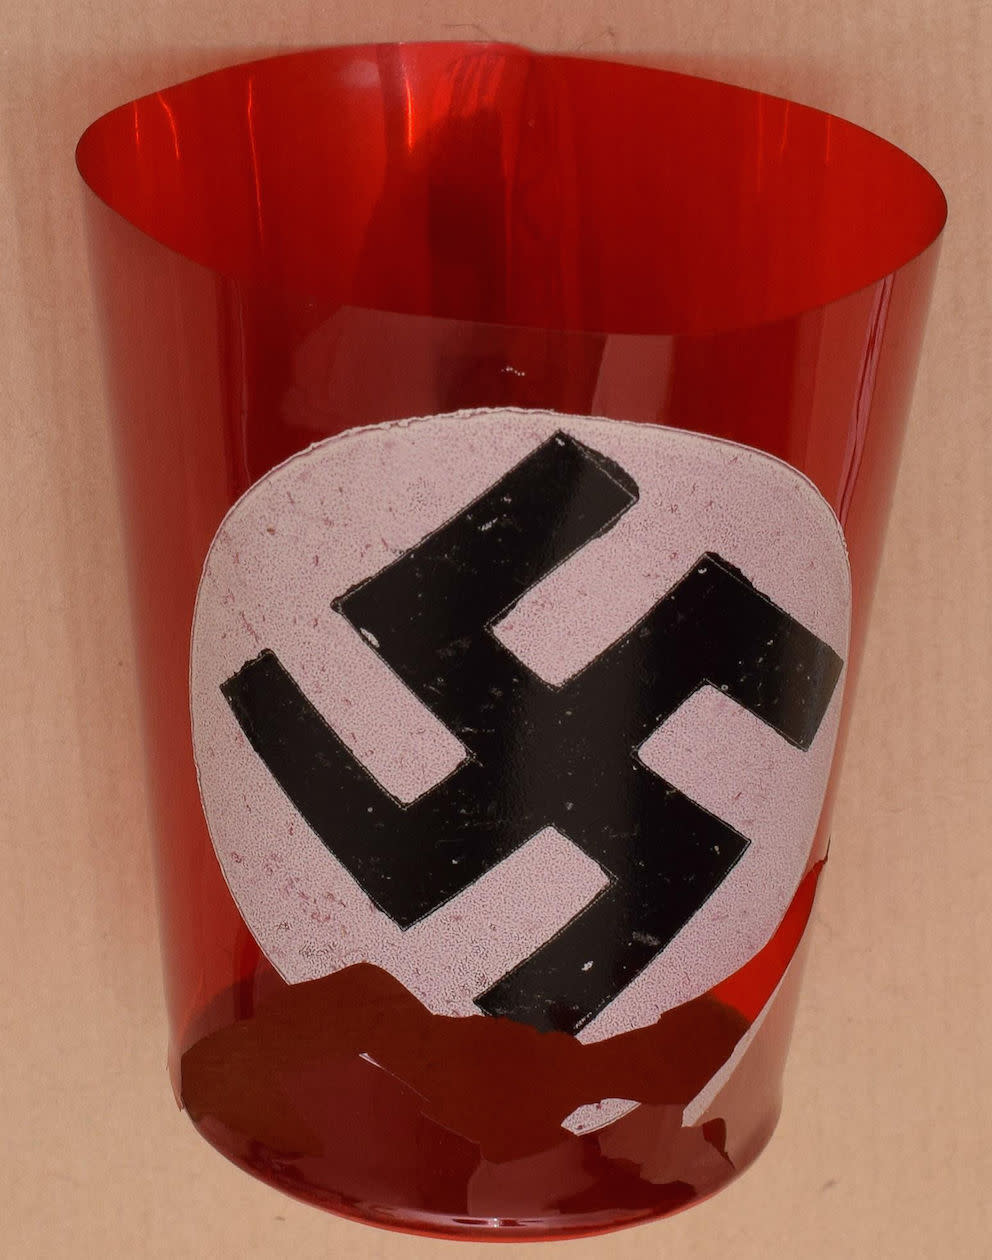 A beaker bearing a Swastika was found on the side board during police searches of the couple’s home in Oxfordshire (Picture: PA)